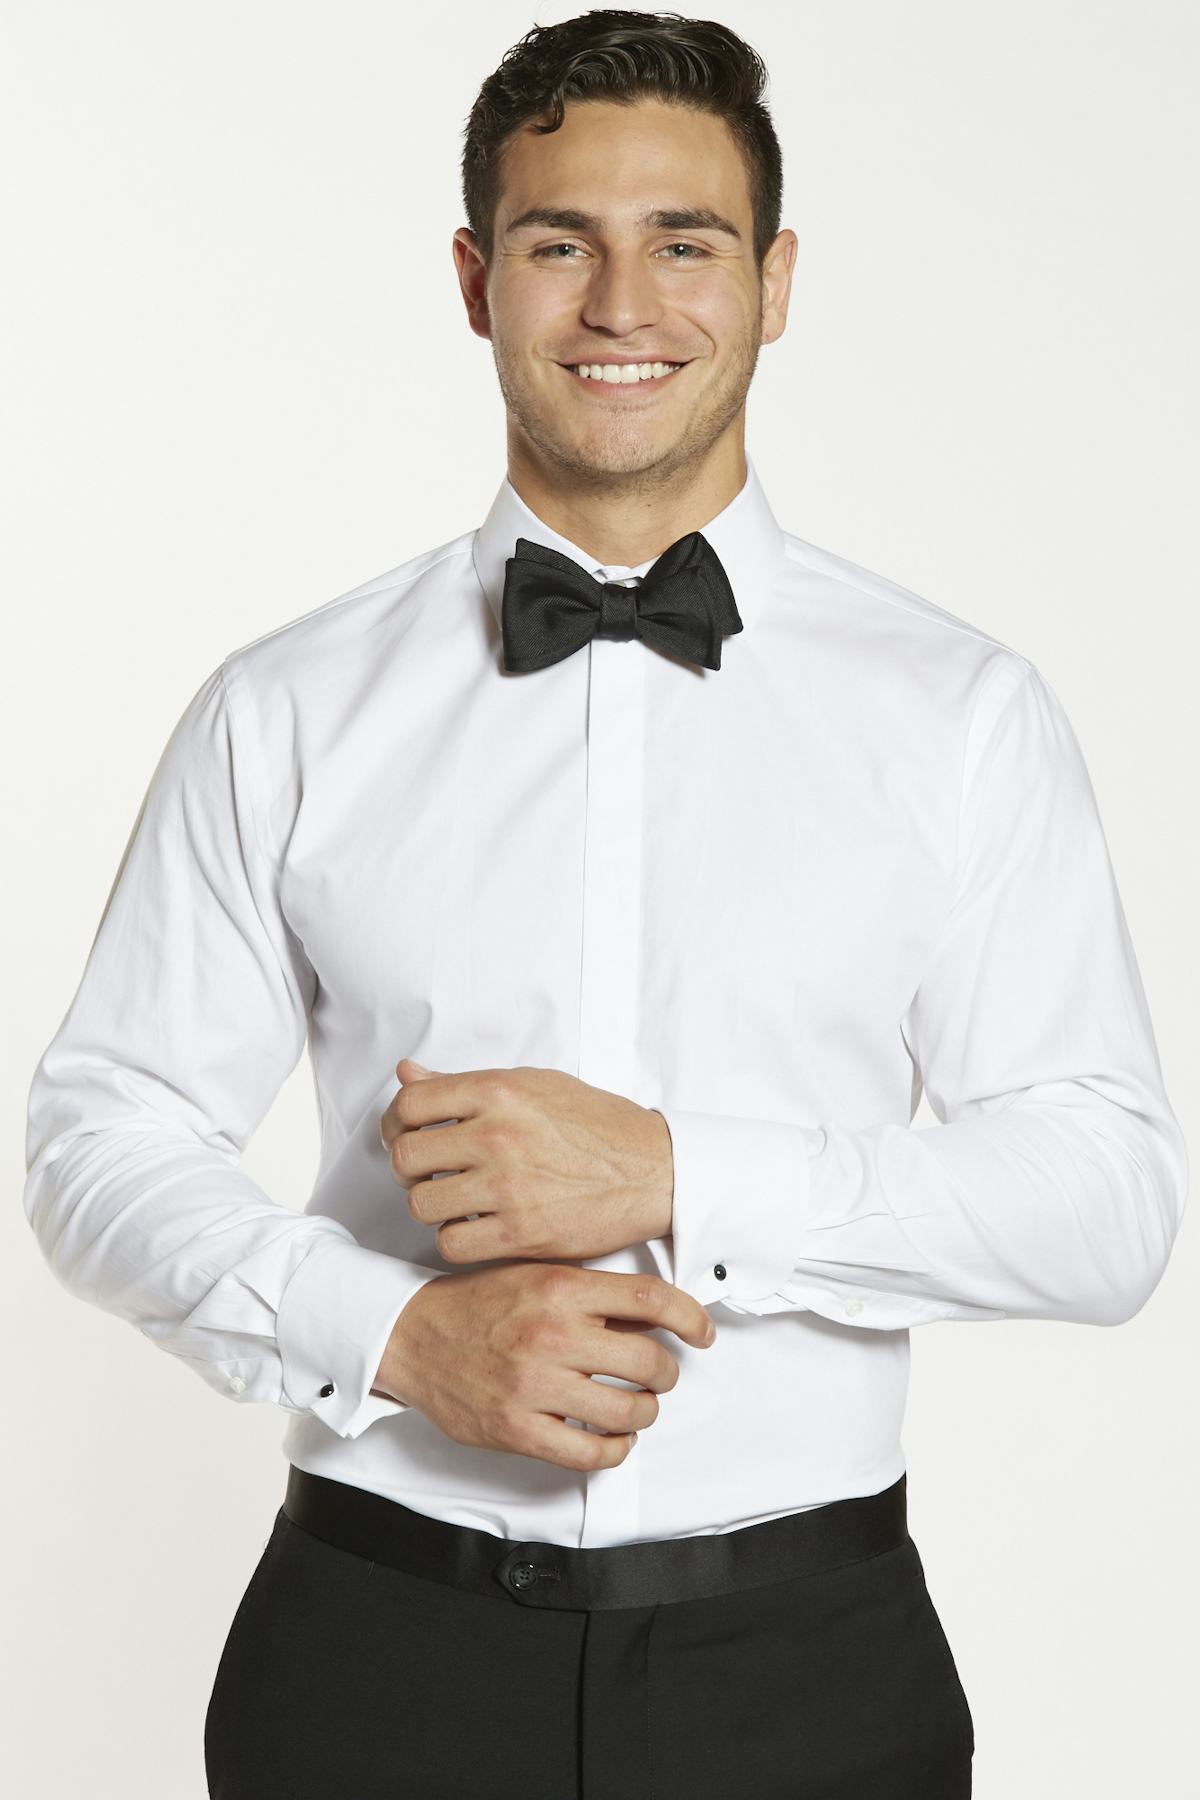  Best groomsman gift ideas and how to wear cufflinks with your wedding suit or tuxedo.